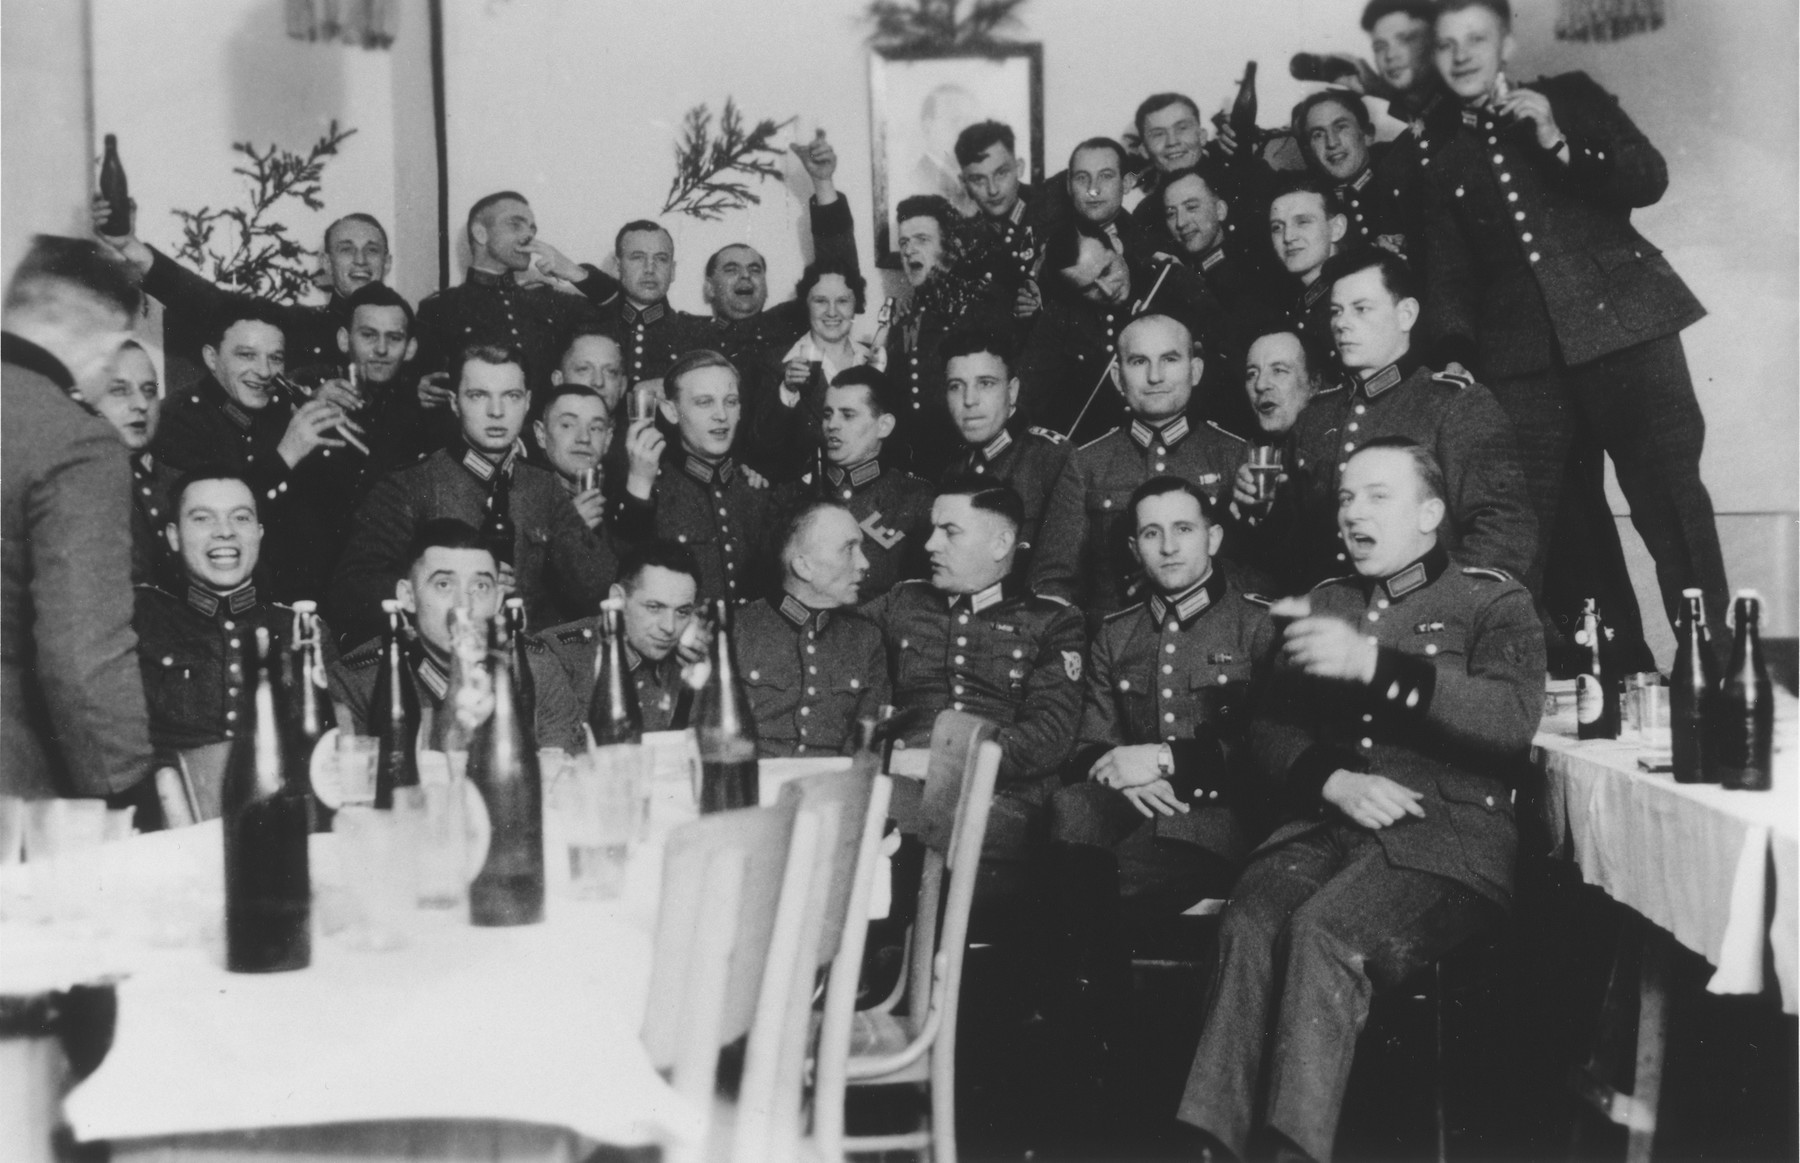 Members of Police Battalion 101 celebrate Christmas in their barracks. 

One image from a photograph album belonging to a member of Police Battalion 101.